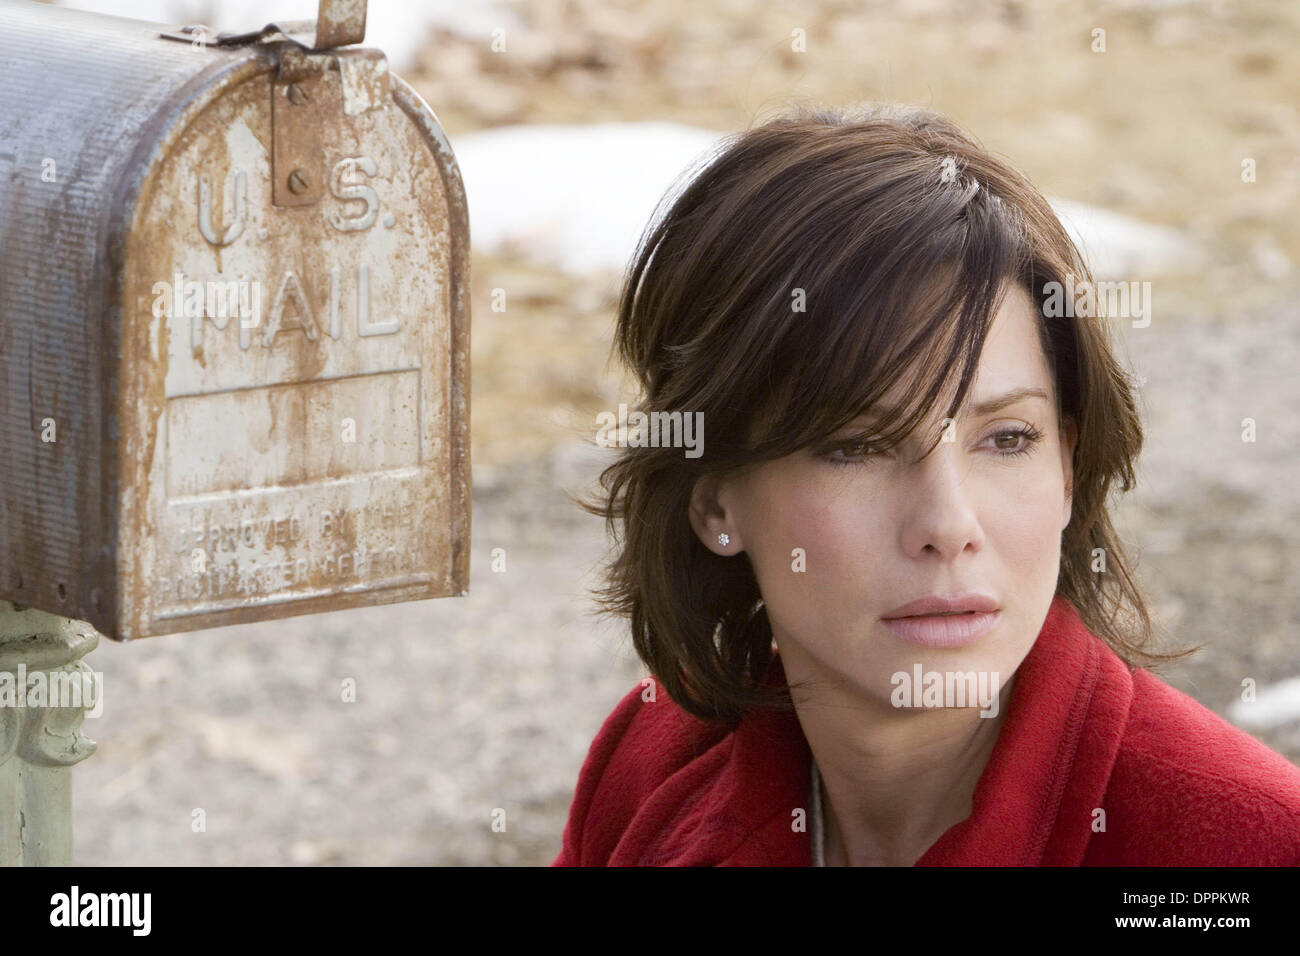 May 22, 2006 - SANDRA BULLOCK stars as Kate Forster in Warner Bros. Pictures' and Village Roadshow Pictures' romantic drama ''The Lake House,'' also starring Keanu Reeves.. .K49221ES.TV-FILM STILL. SUPPLIED BY    2006.(Credit Image: © Globe Photos/ZUMAPRESS.com) Stock Photo